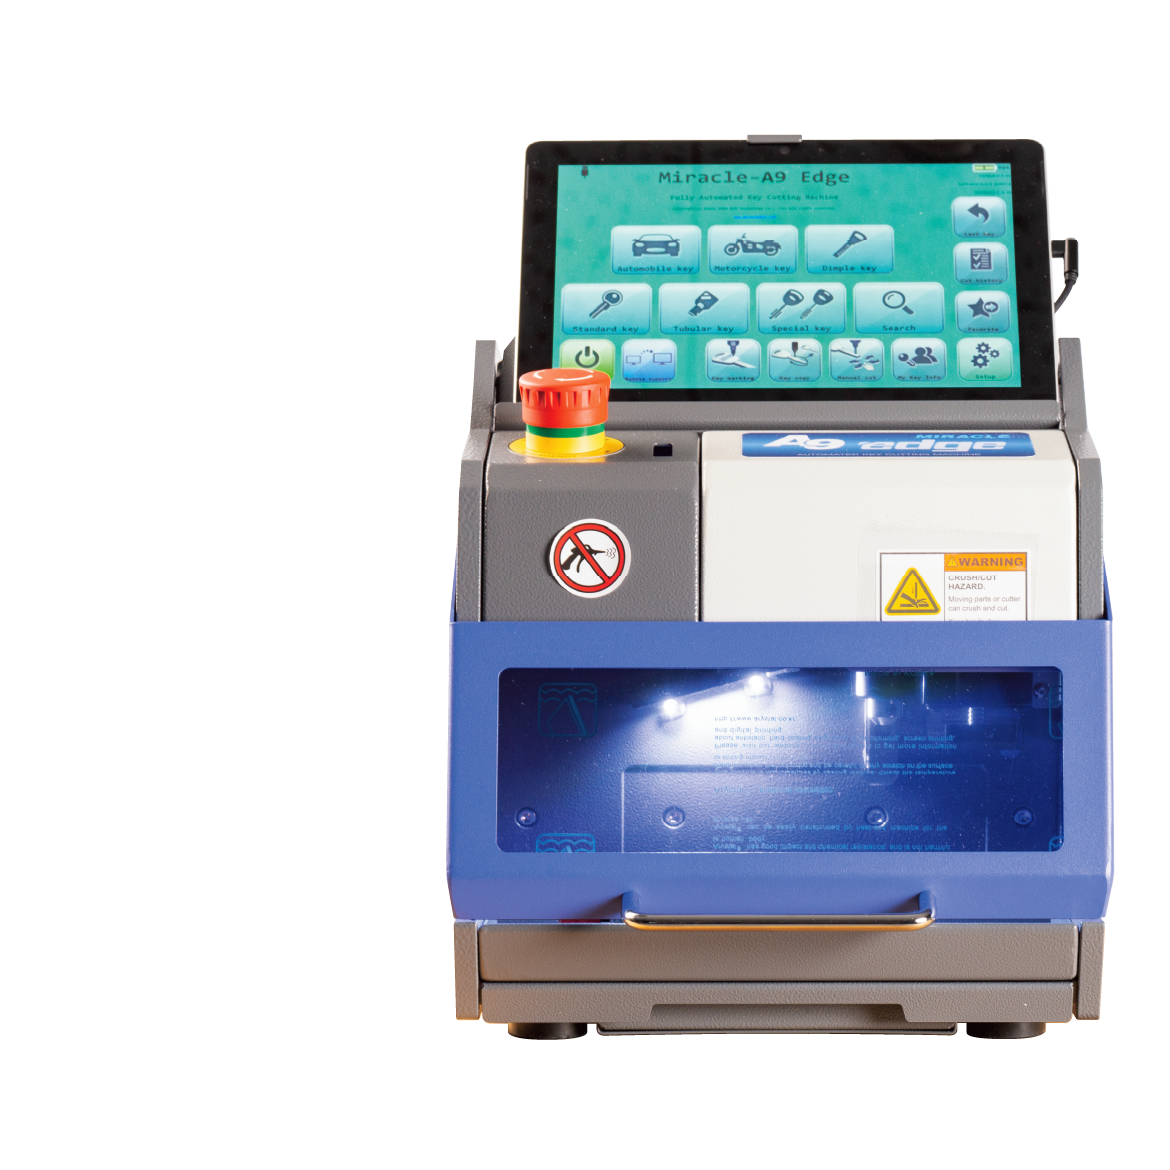 miracle A9edge